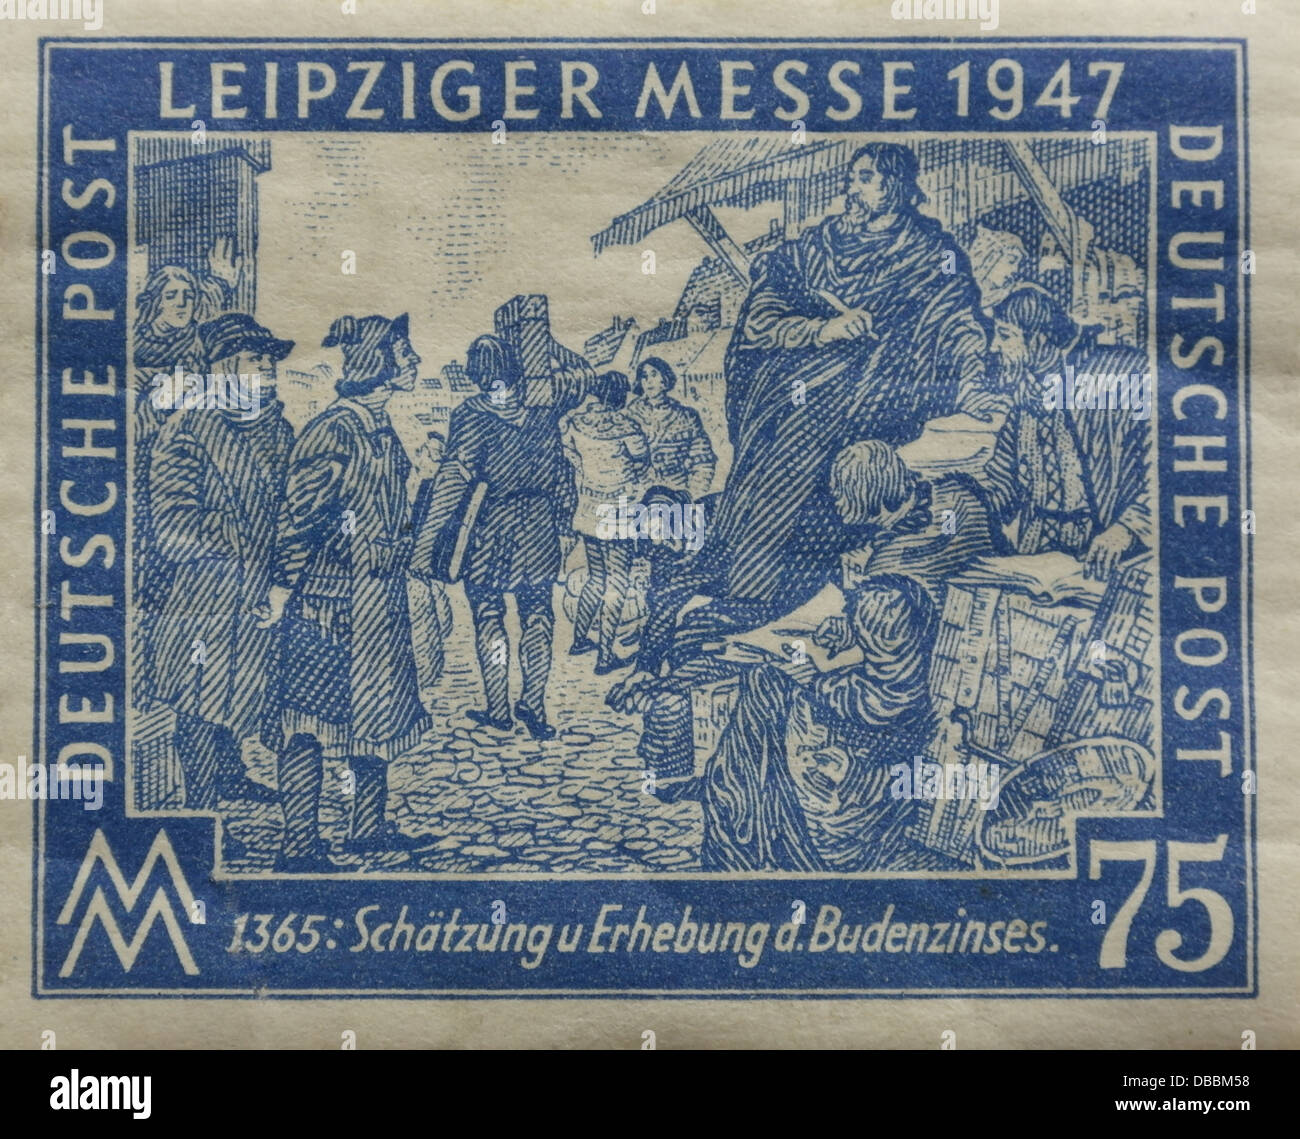 Blue 75 Pfennig postage stamp, dated 1947, showing officials collecting stall charges, Leipzig Trade Fair, Leipzig, East Germany Stock Photo